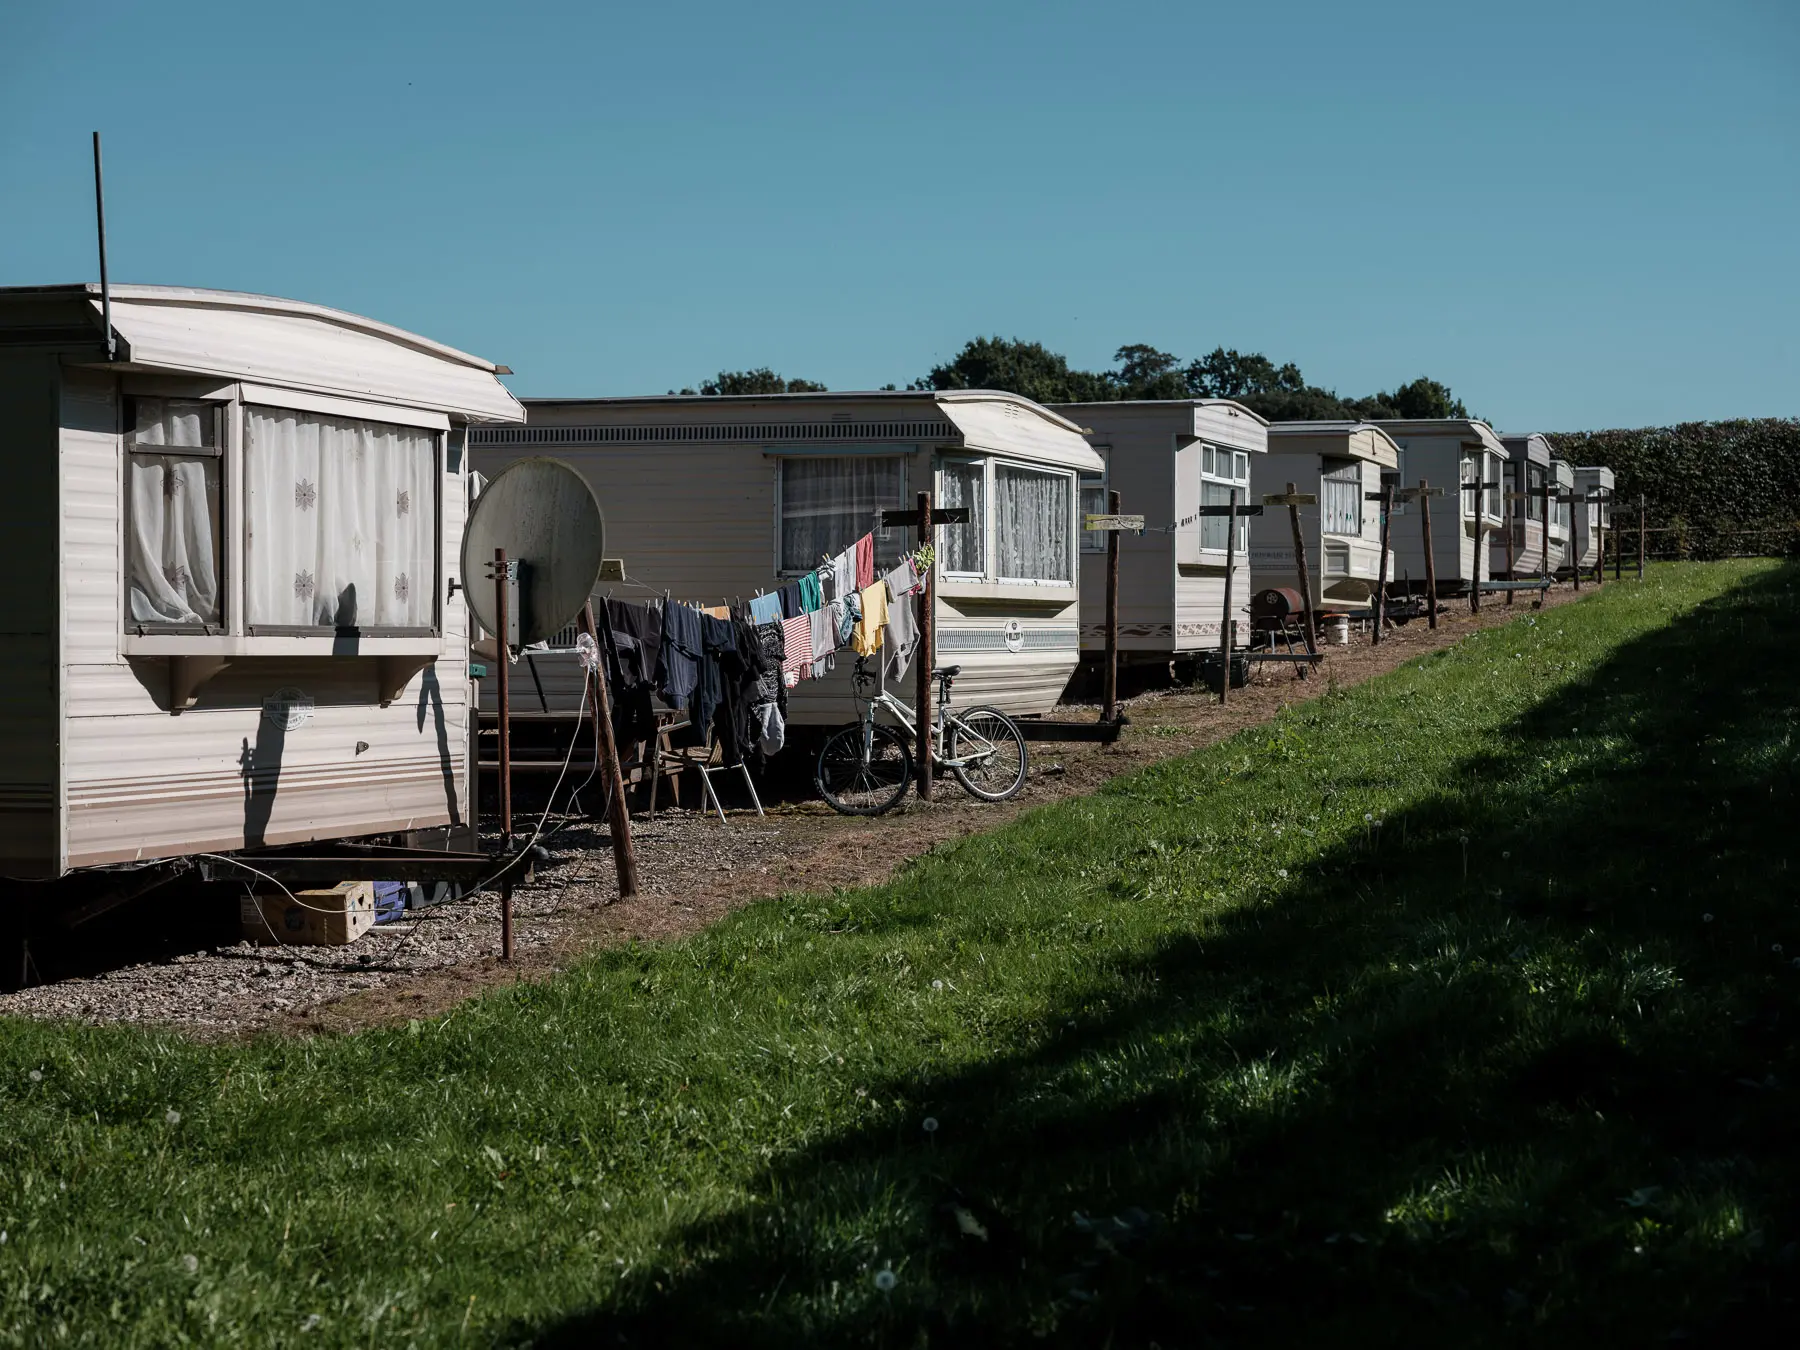 The caravans lined up in a row with laundry hanging out to dry